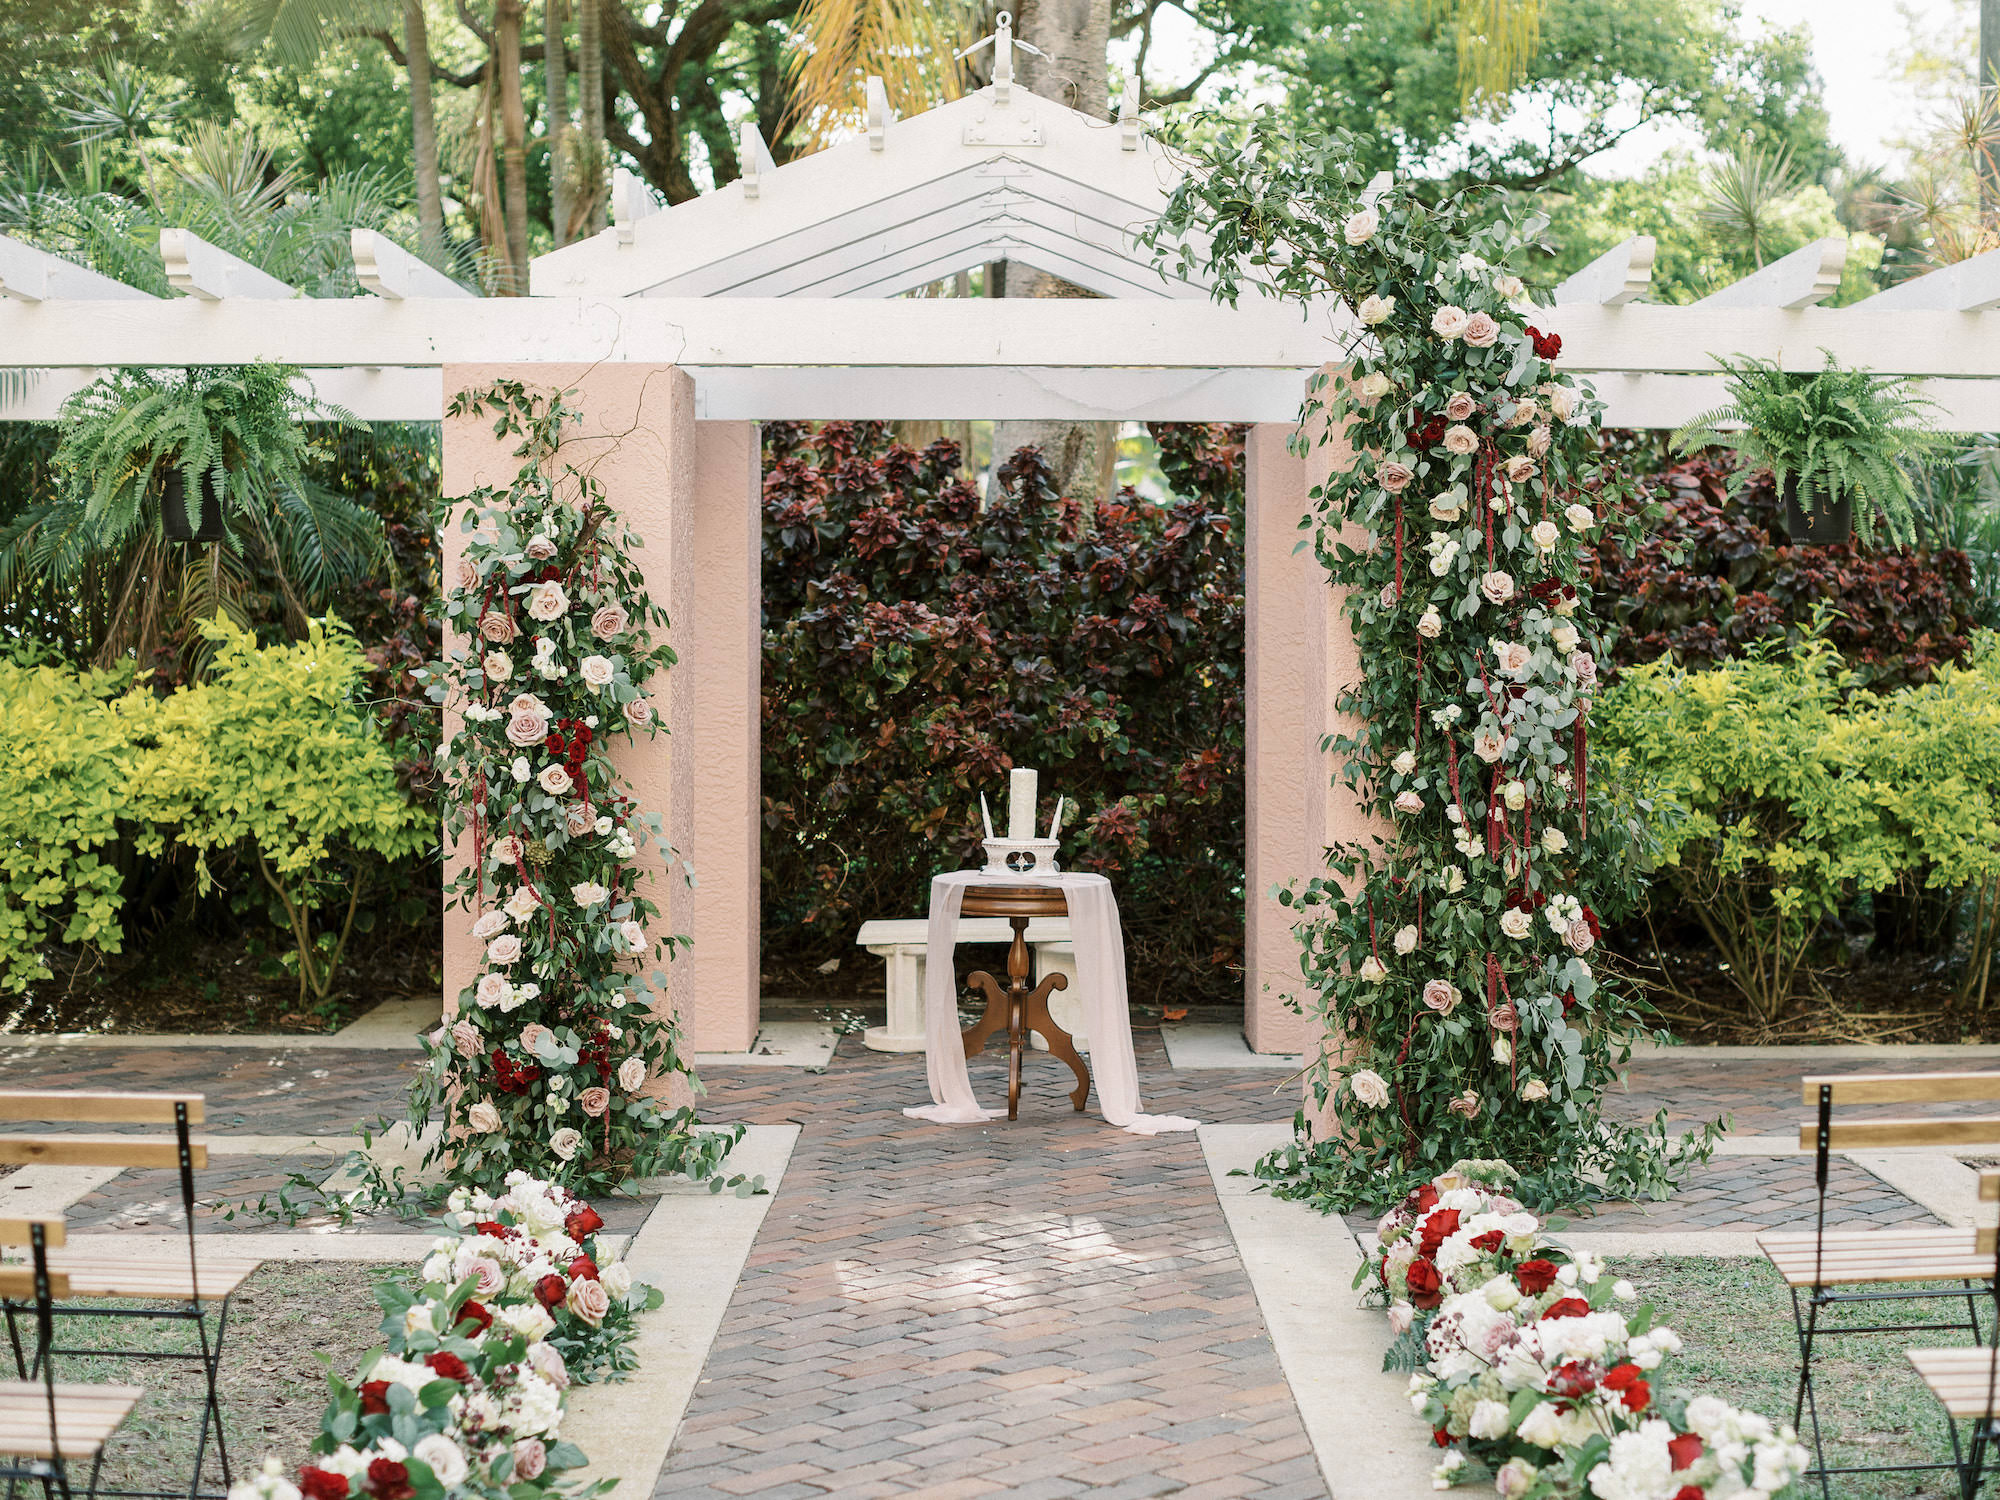 Royal Elegant Glam Gatsby Wedding Ceremony Decor, Outdoor Courtyard at St. Pete Wedding Venue The Vinoy Renaissance, Lush Greenery White, Red, Blush Pink and Mauve Roses Floral Pillars | Tampa Bay Wedding Planner and Designer John Campbell Weddings